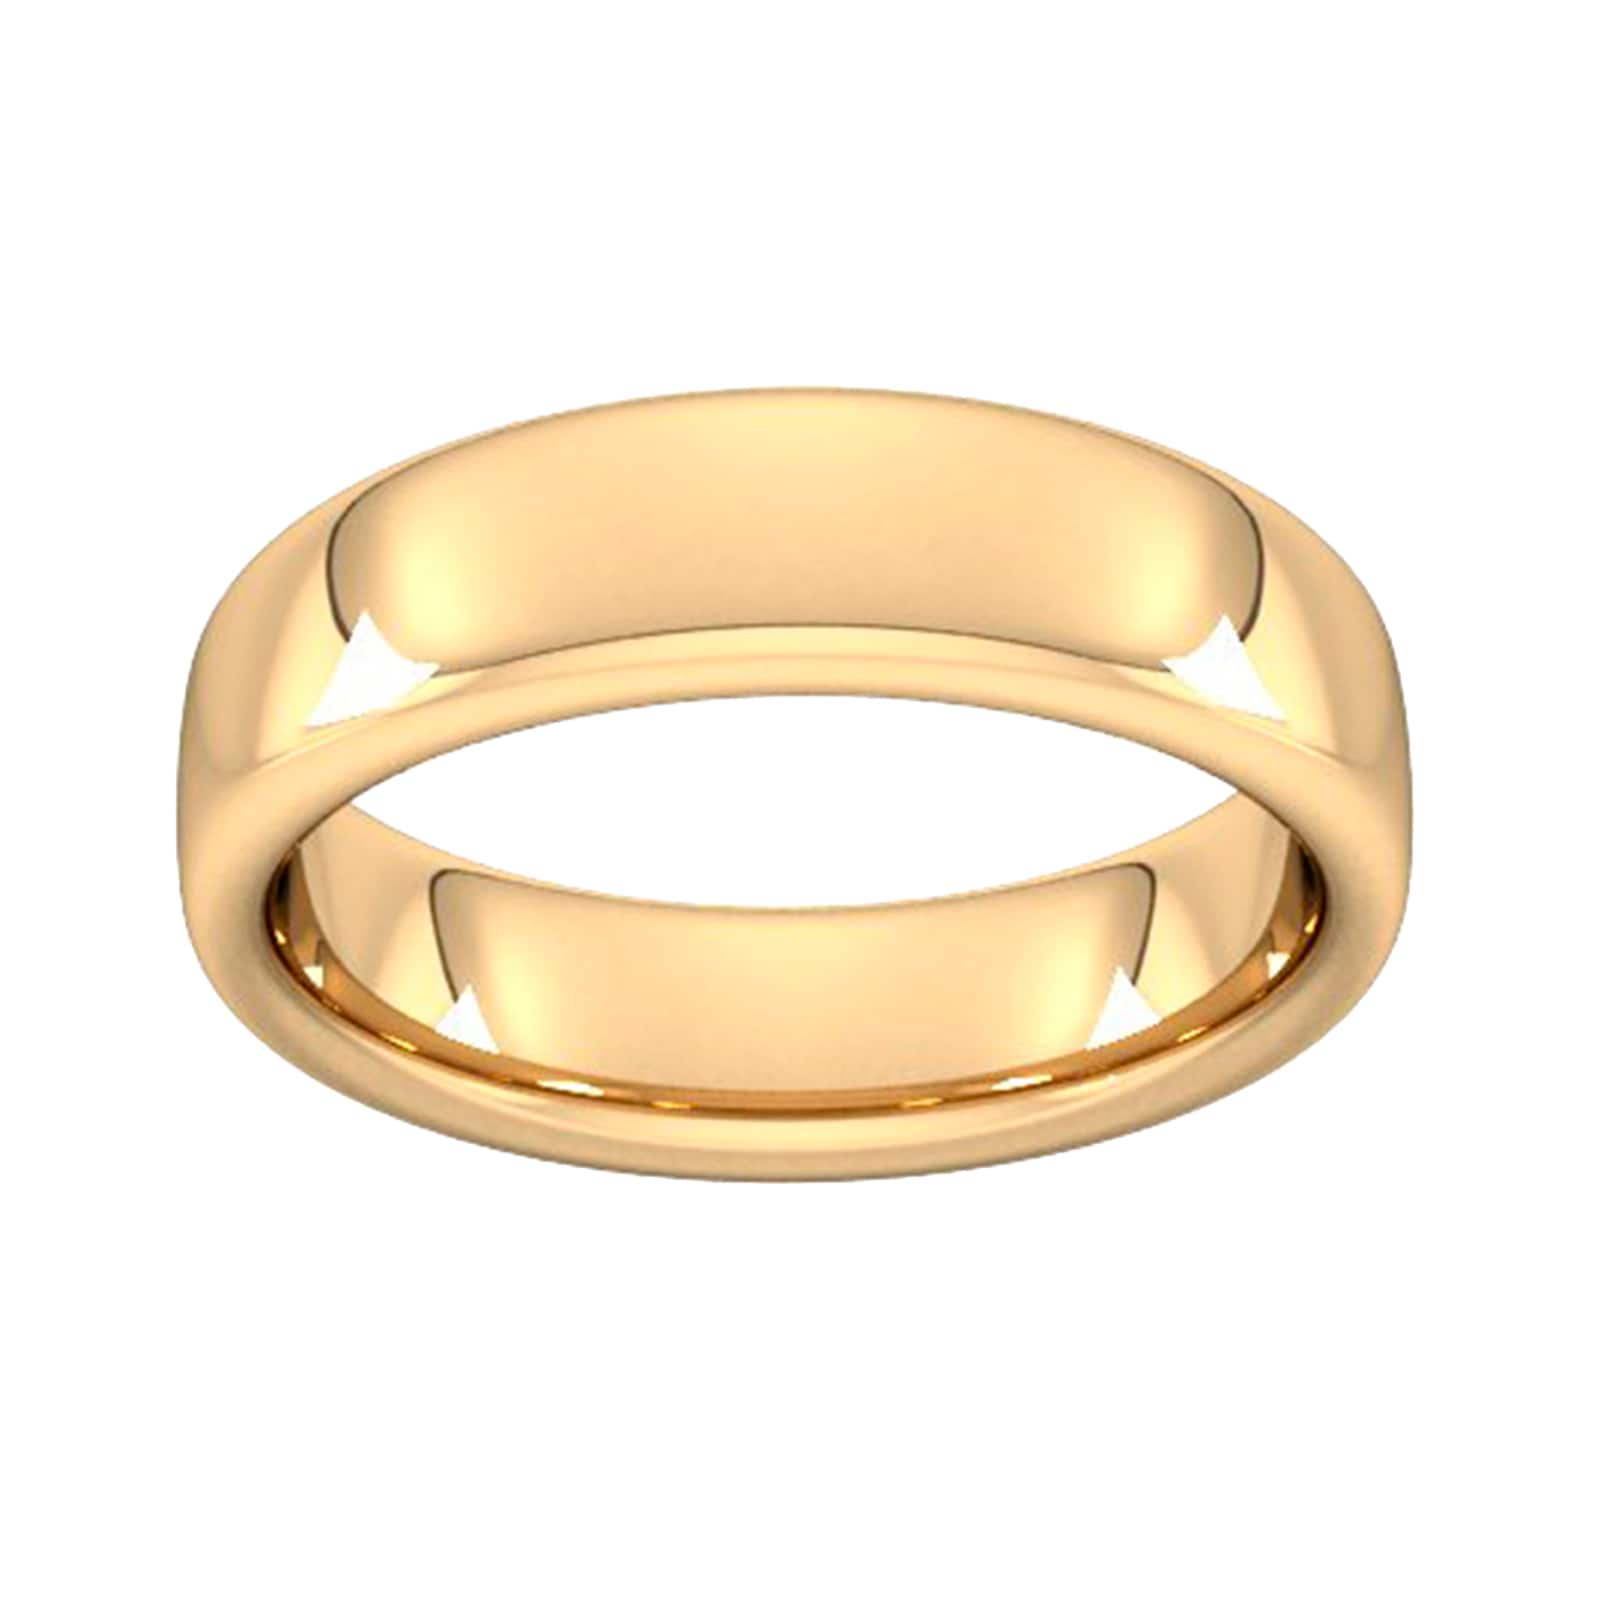 6mm Slight Court Extra Heavy Wedding Ring In 9 Carat Yellow Gold - Ring Size I